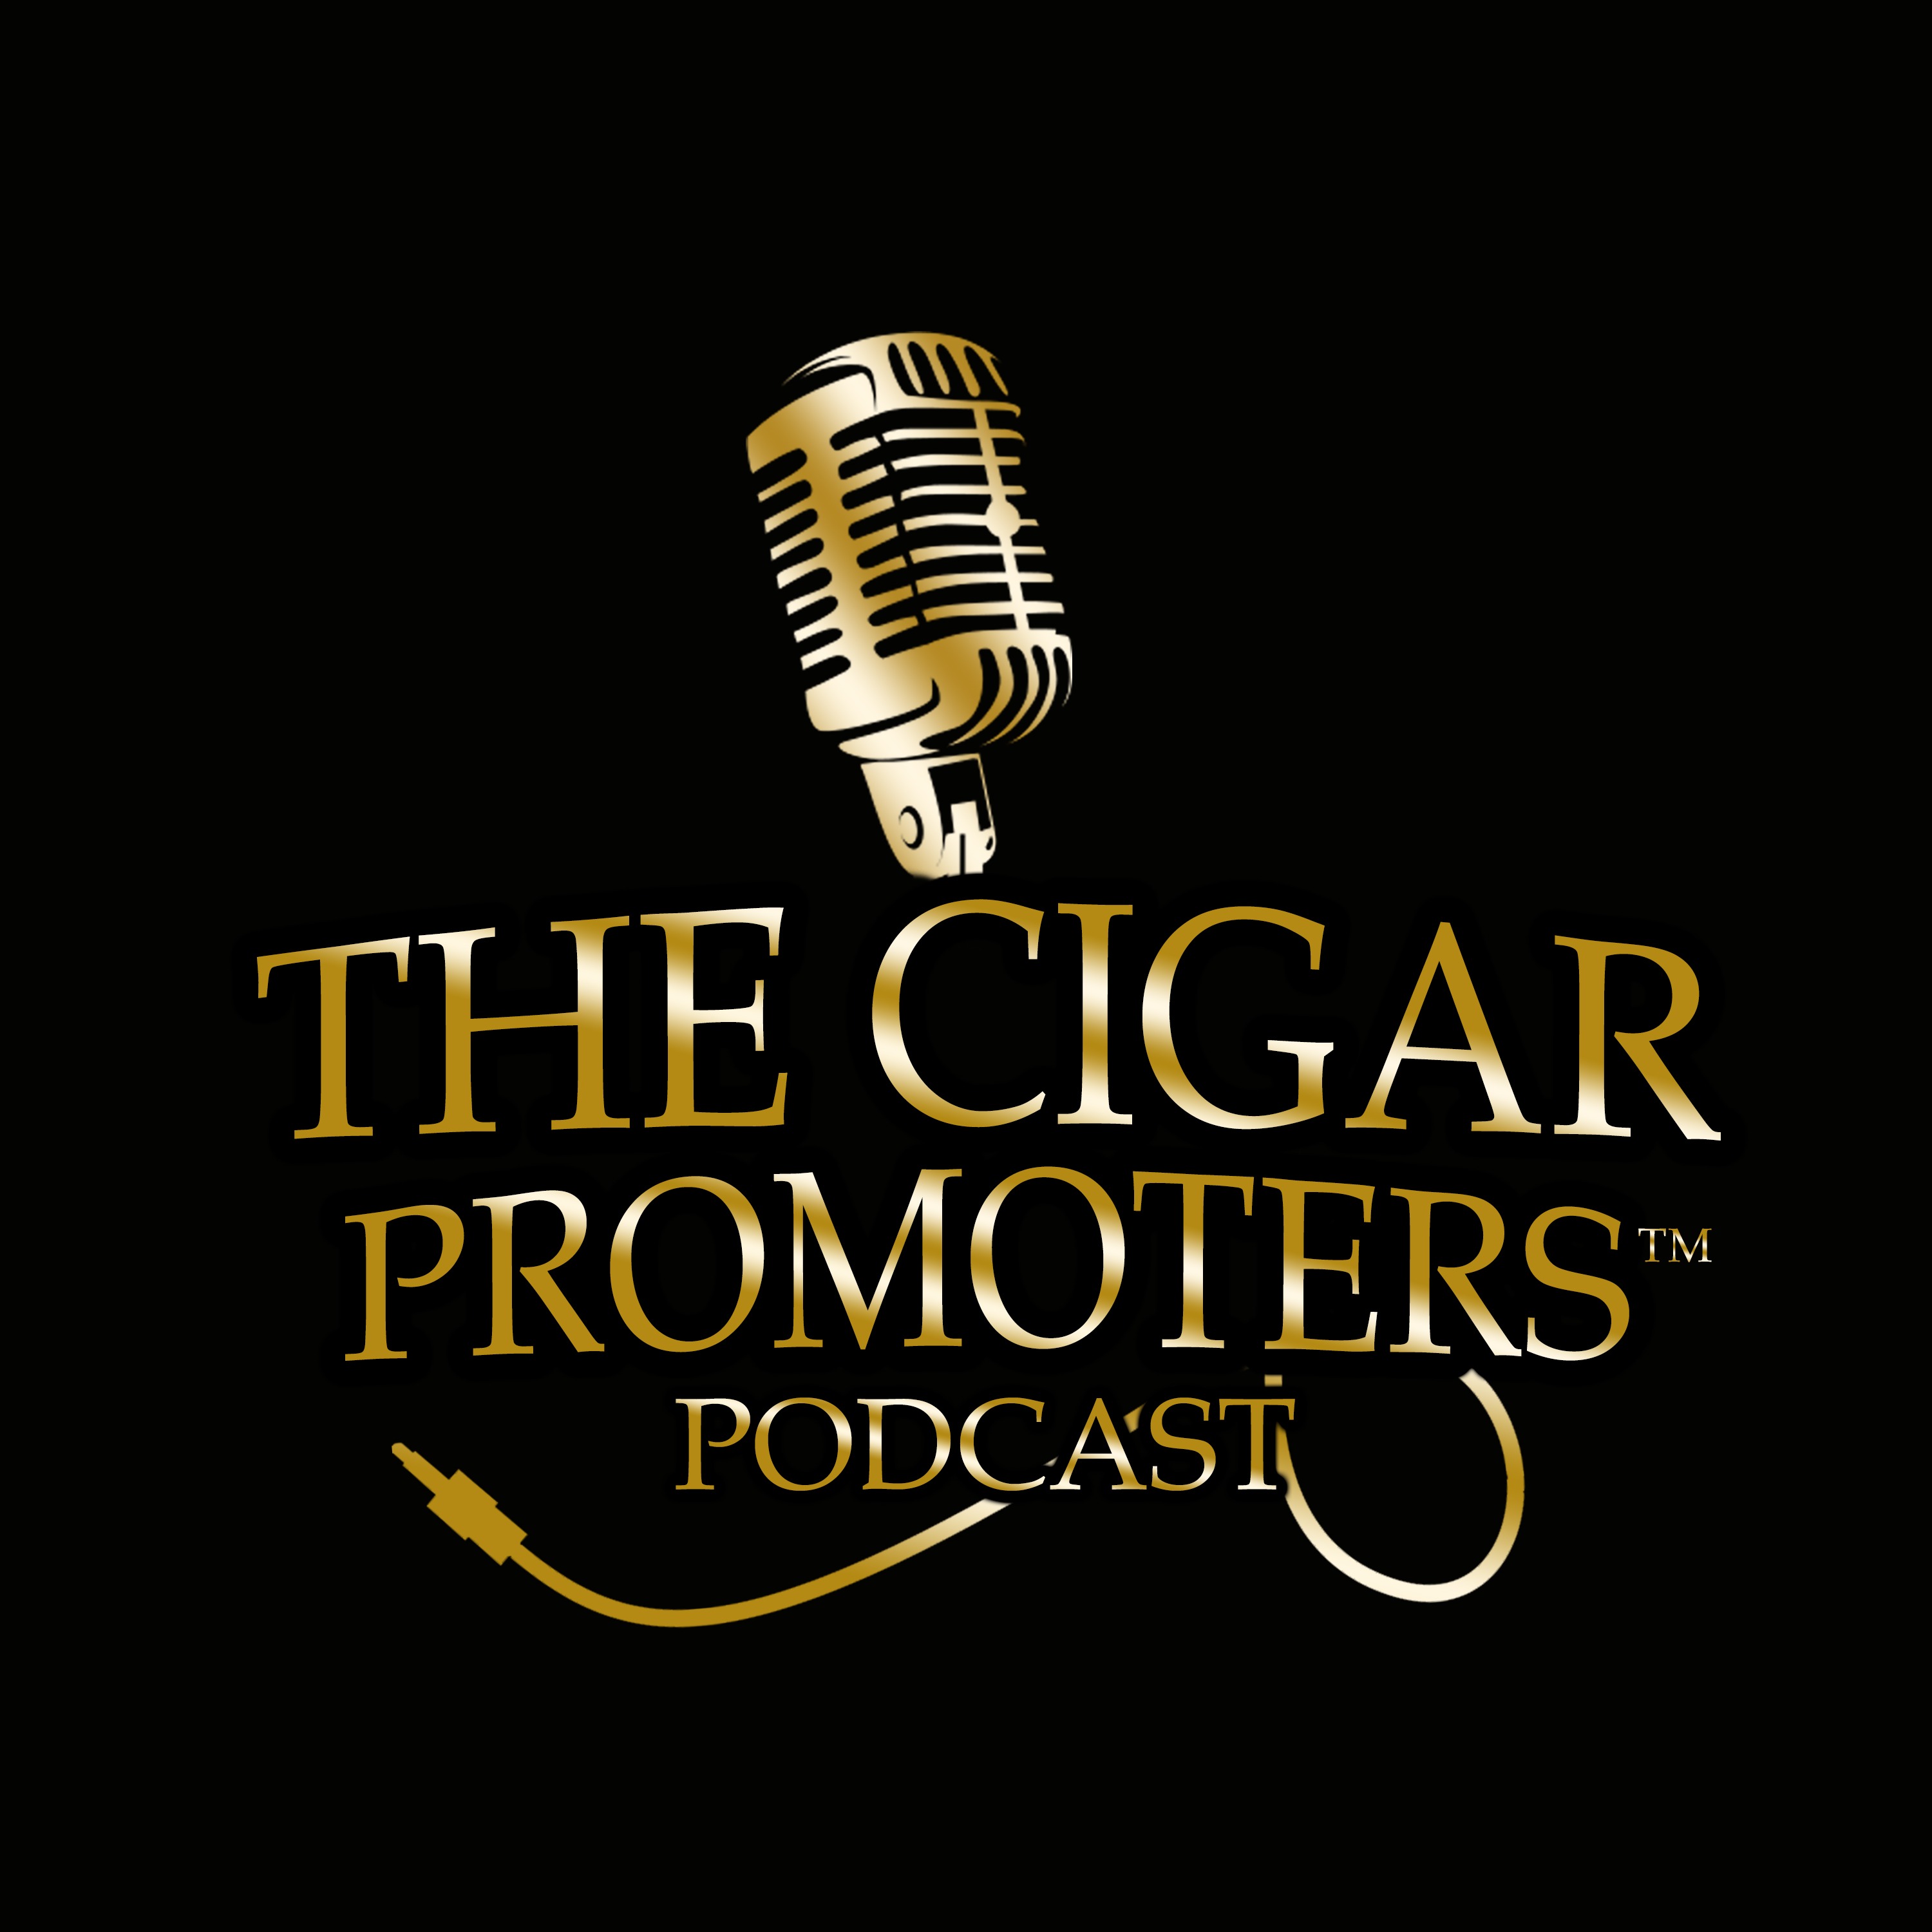 THE CIGAR PROMOTERS PODCAST